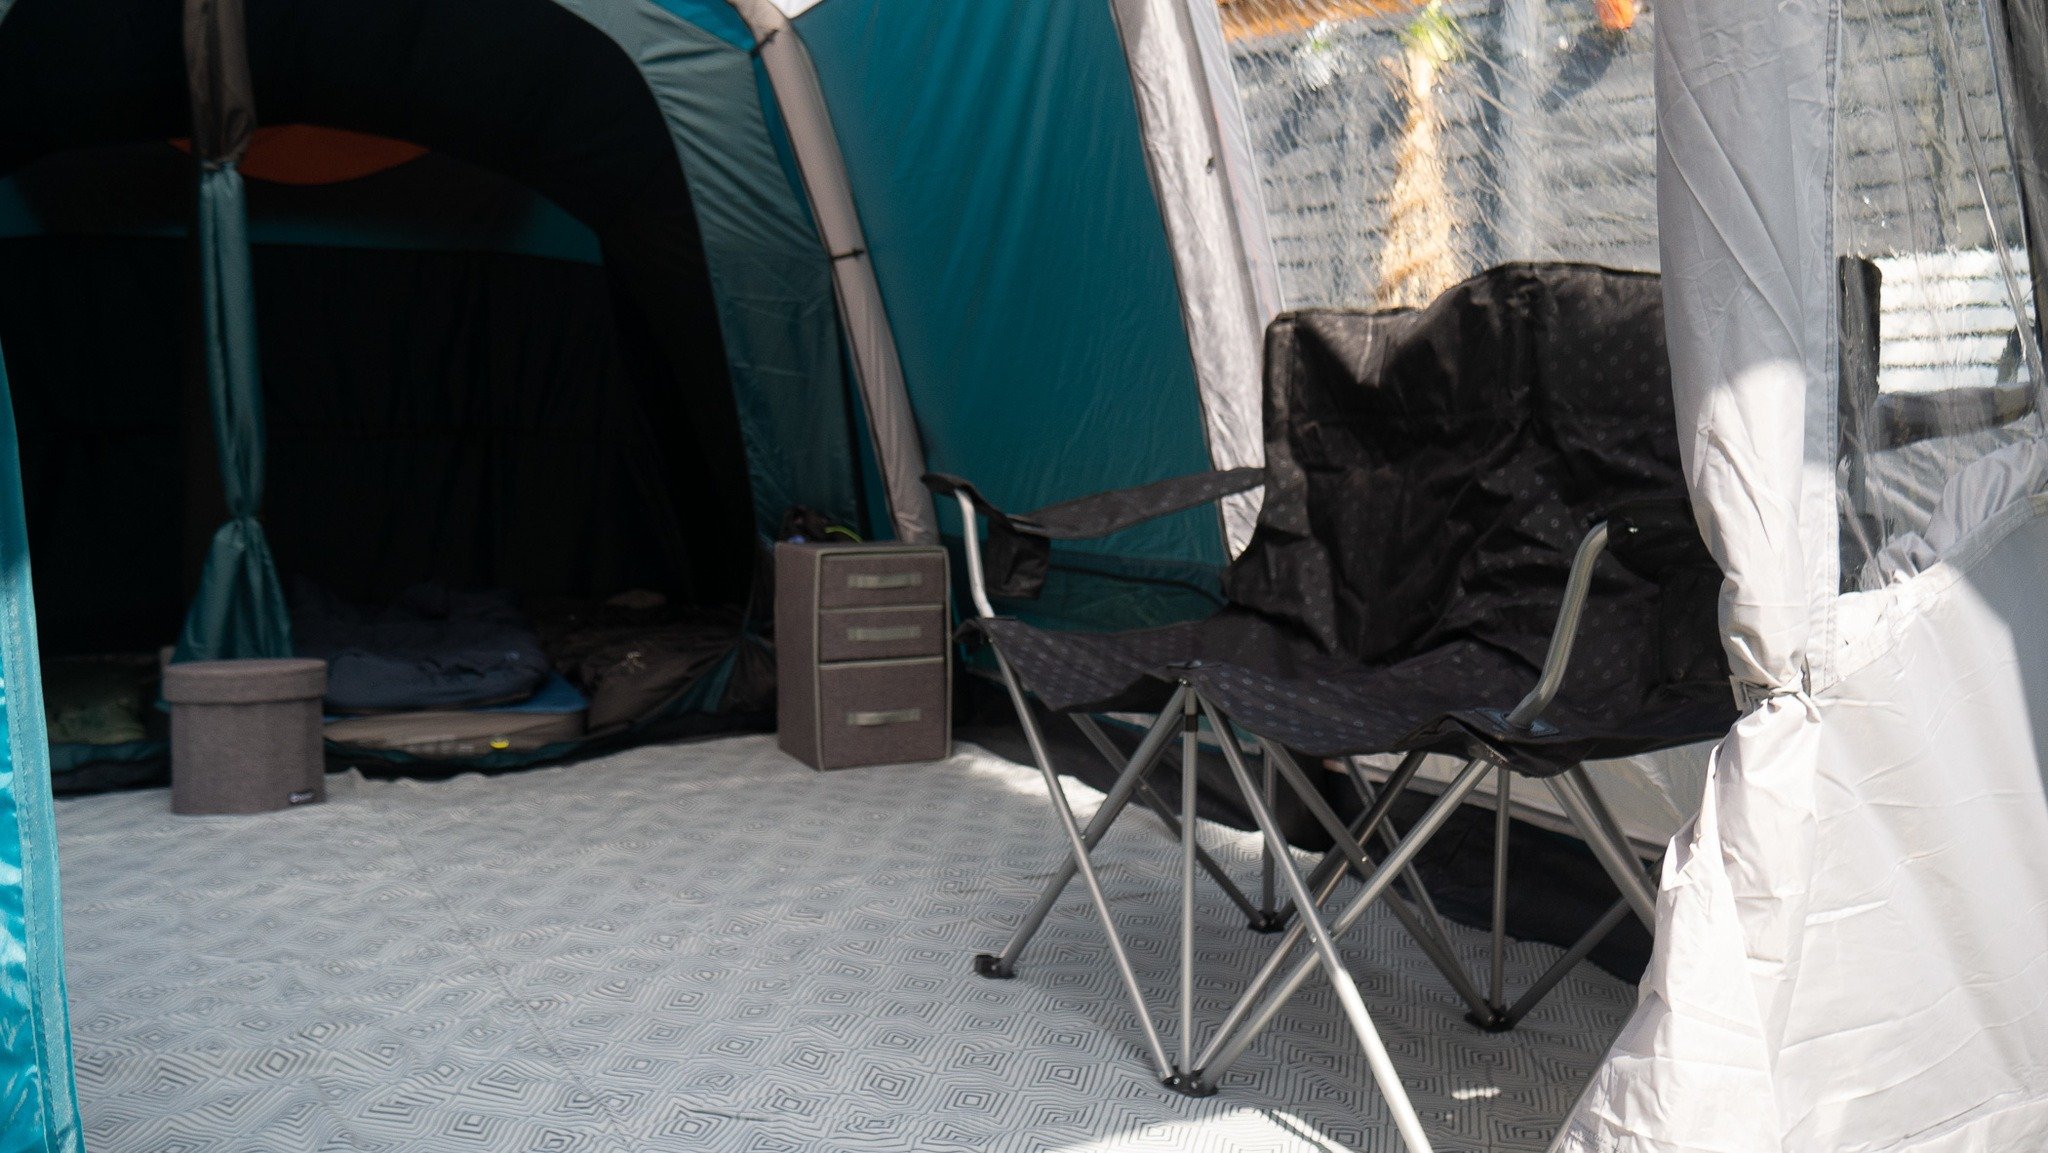 Inside the tent with camping furniture